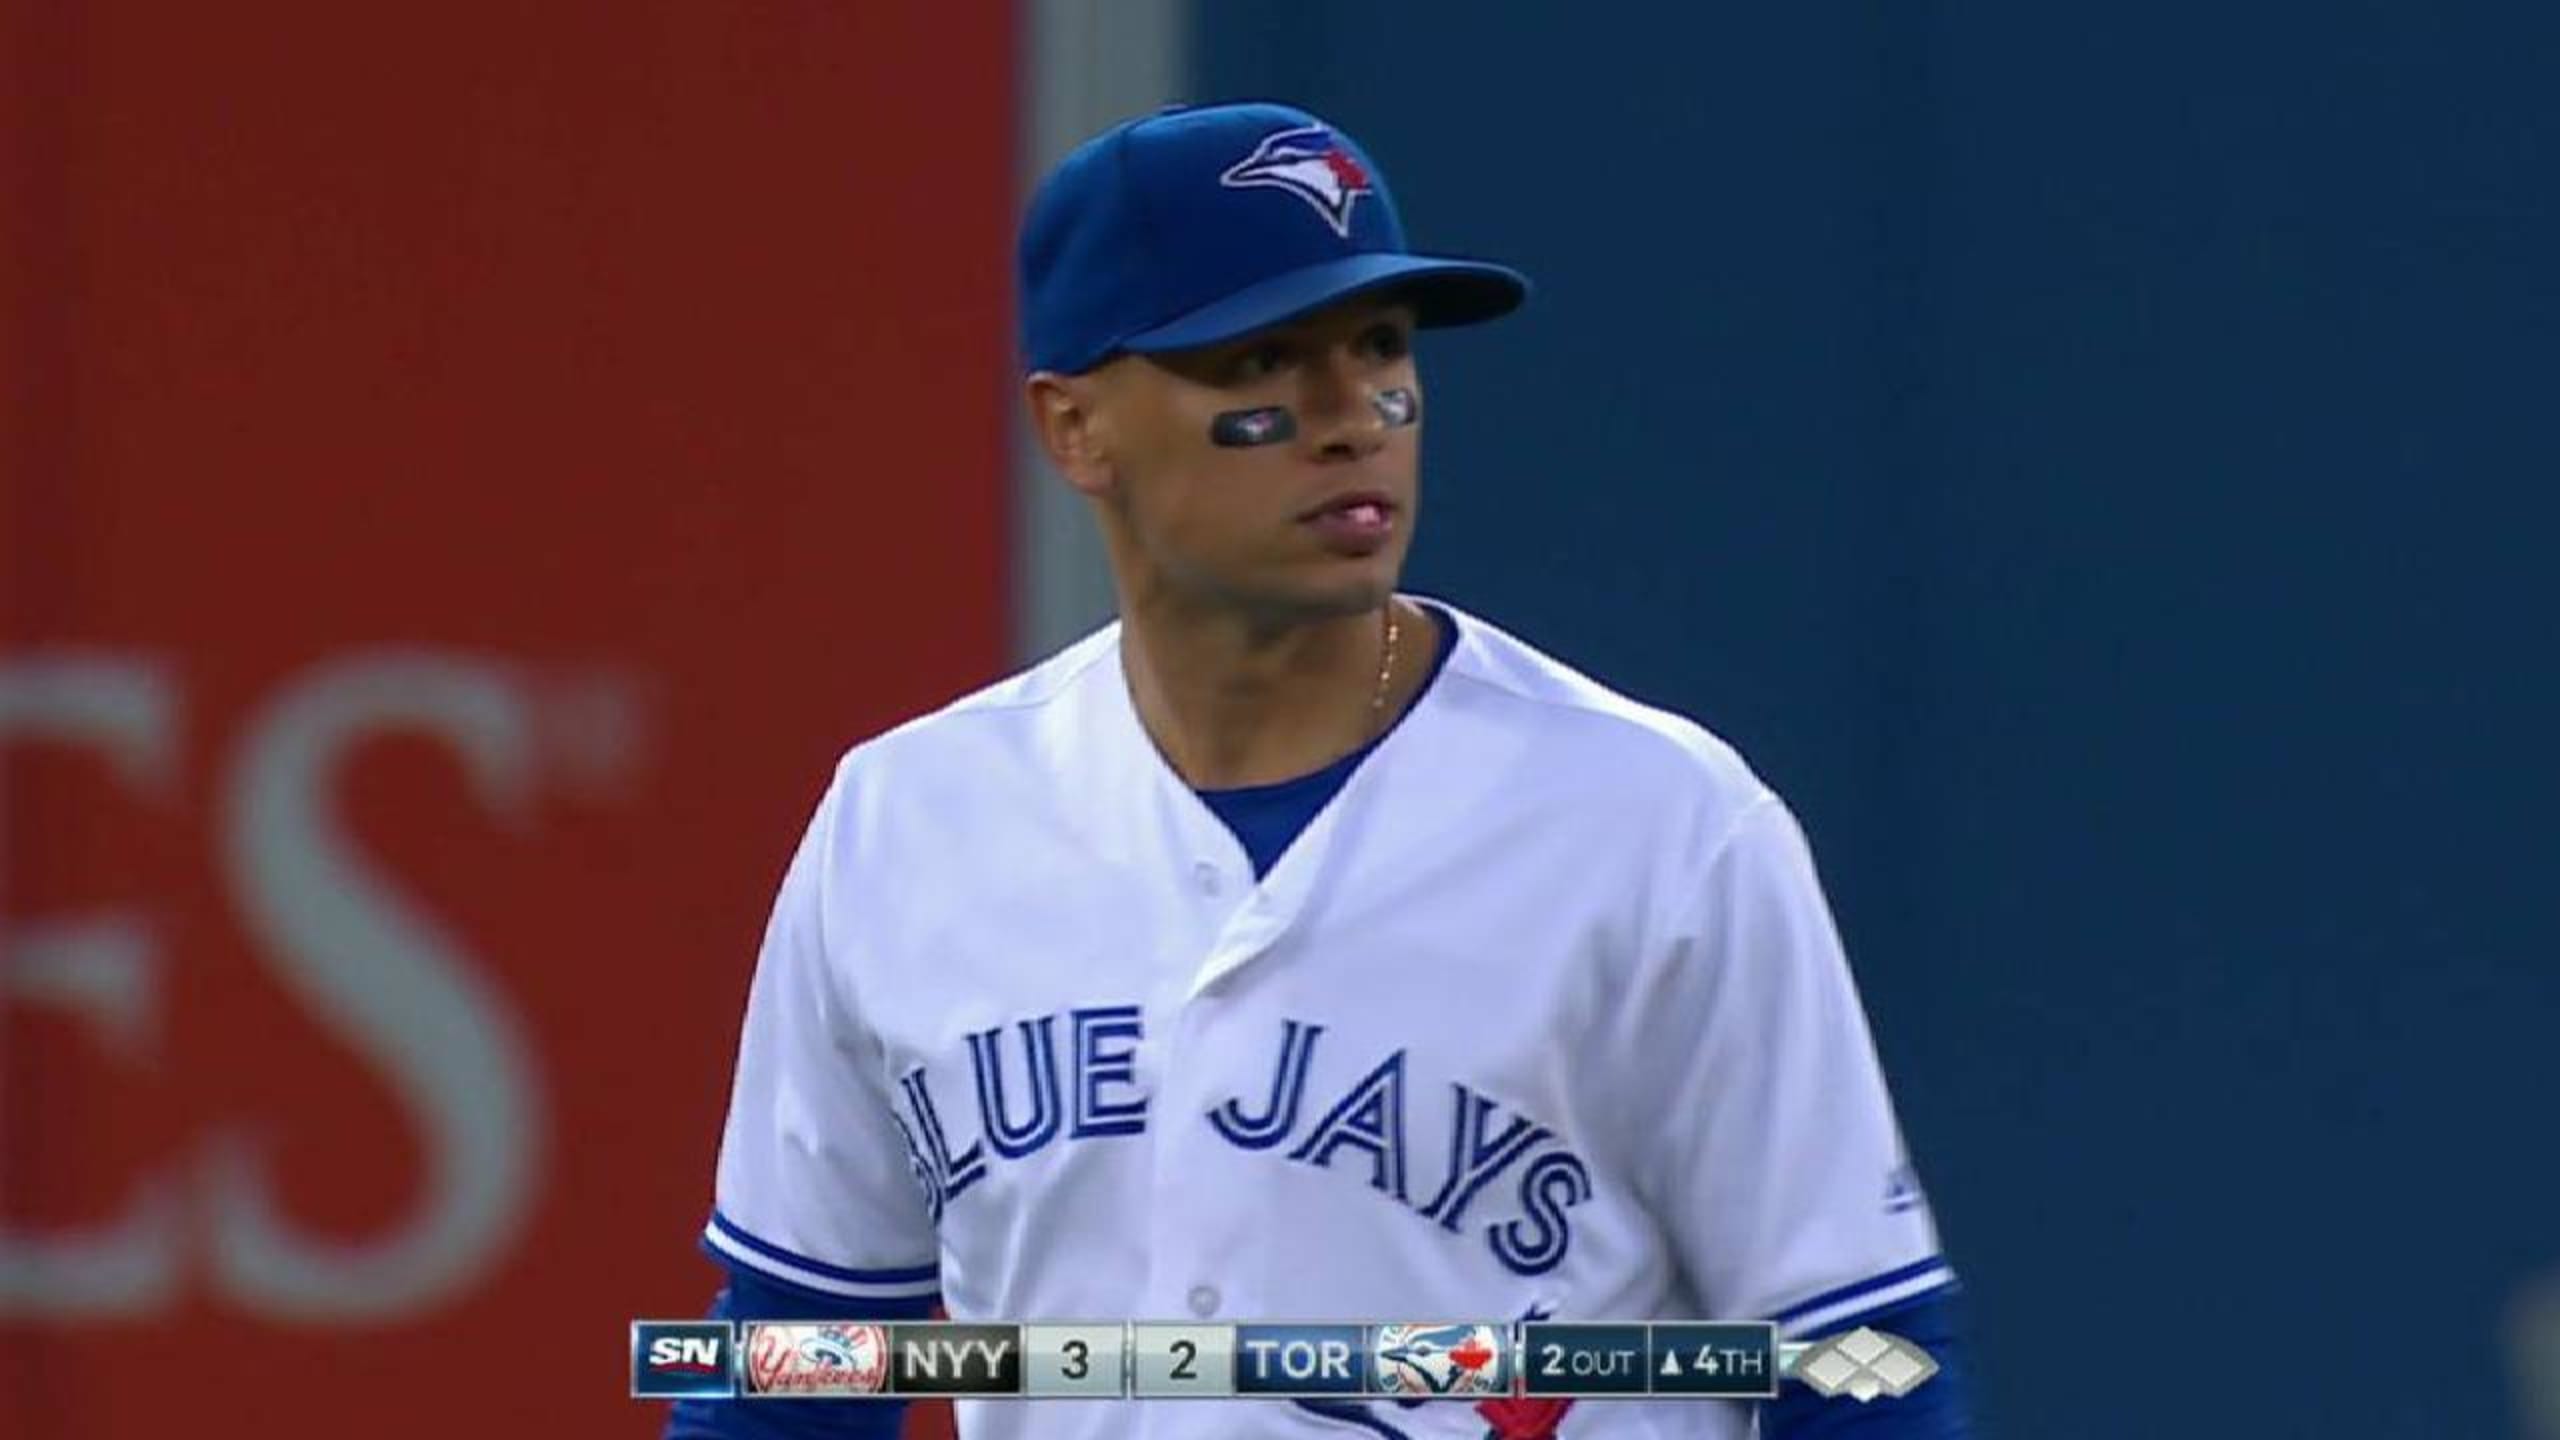 Ryan Goins continues to stay clutch as Blue Jays cruise to win